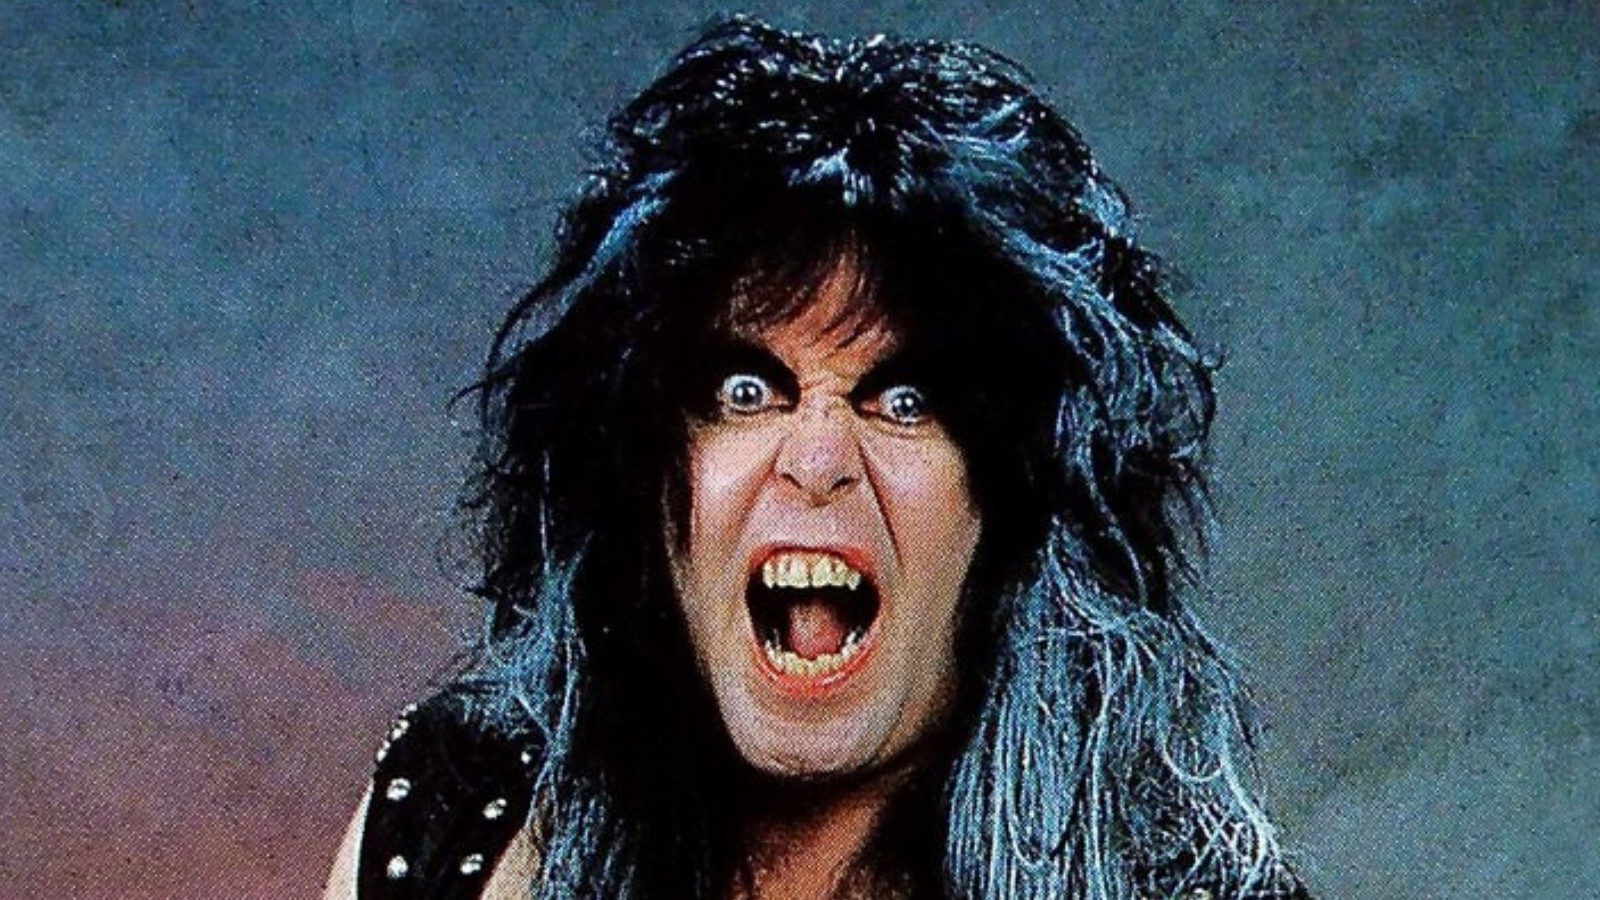 Blackie Lawless's Codpiece and Chains